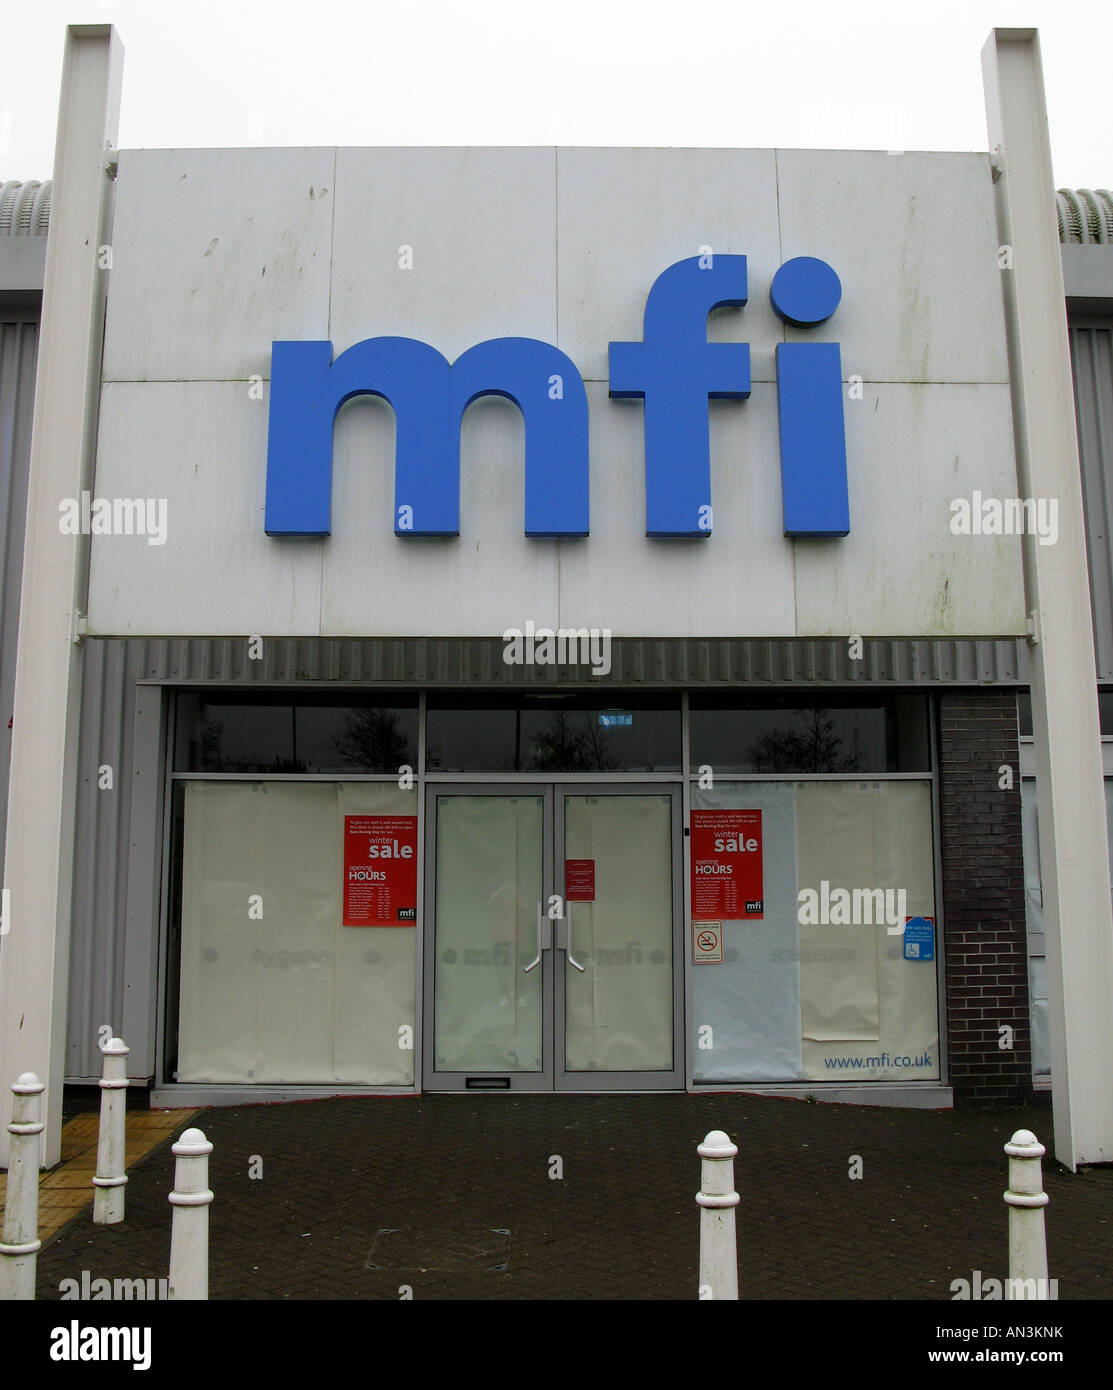 A closed MFI store with the windows boarded up Stock Photo